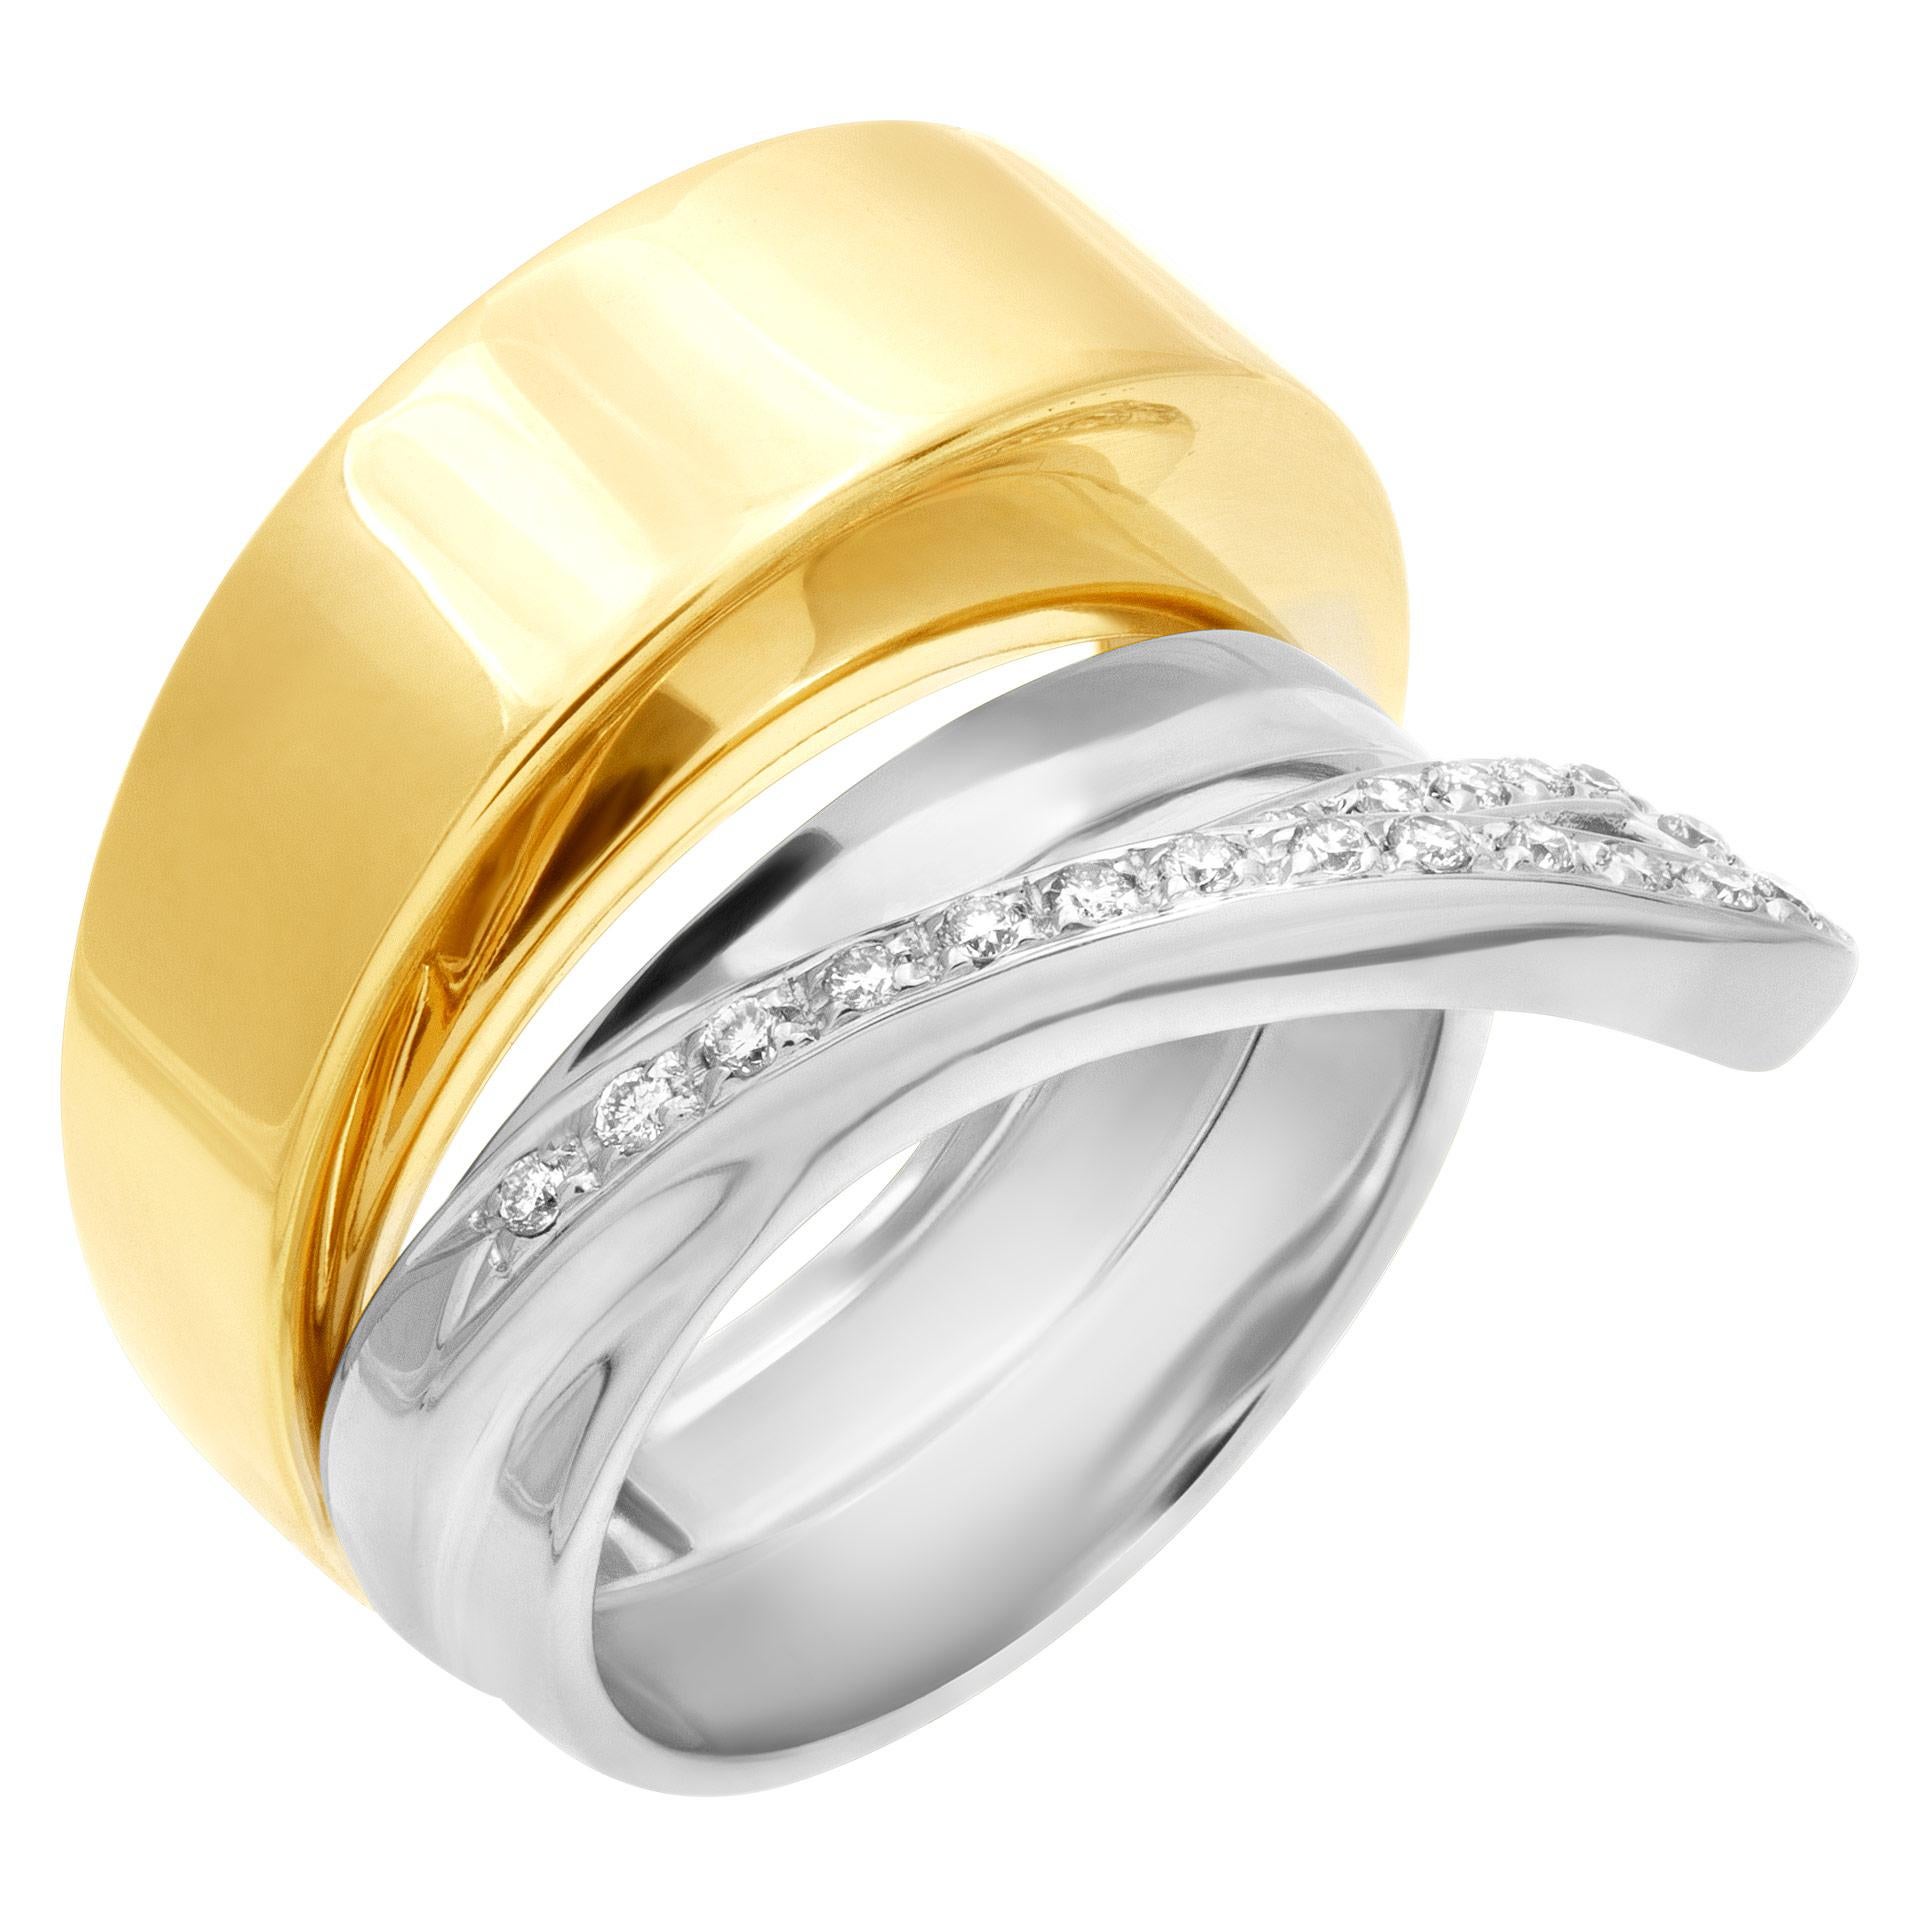 Stack ring in 18k white and yellow gold with diamond swirl approximately 0.20 carat. Size 7  This Diamond ring is currently size 7 and some items can be sized up or down, please ask! It weighs 7.6 pennyweights and is 18k White & Yellow Gold.
